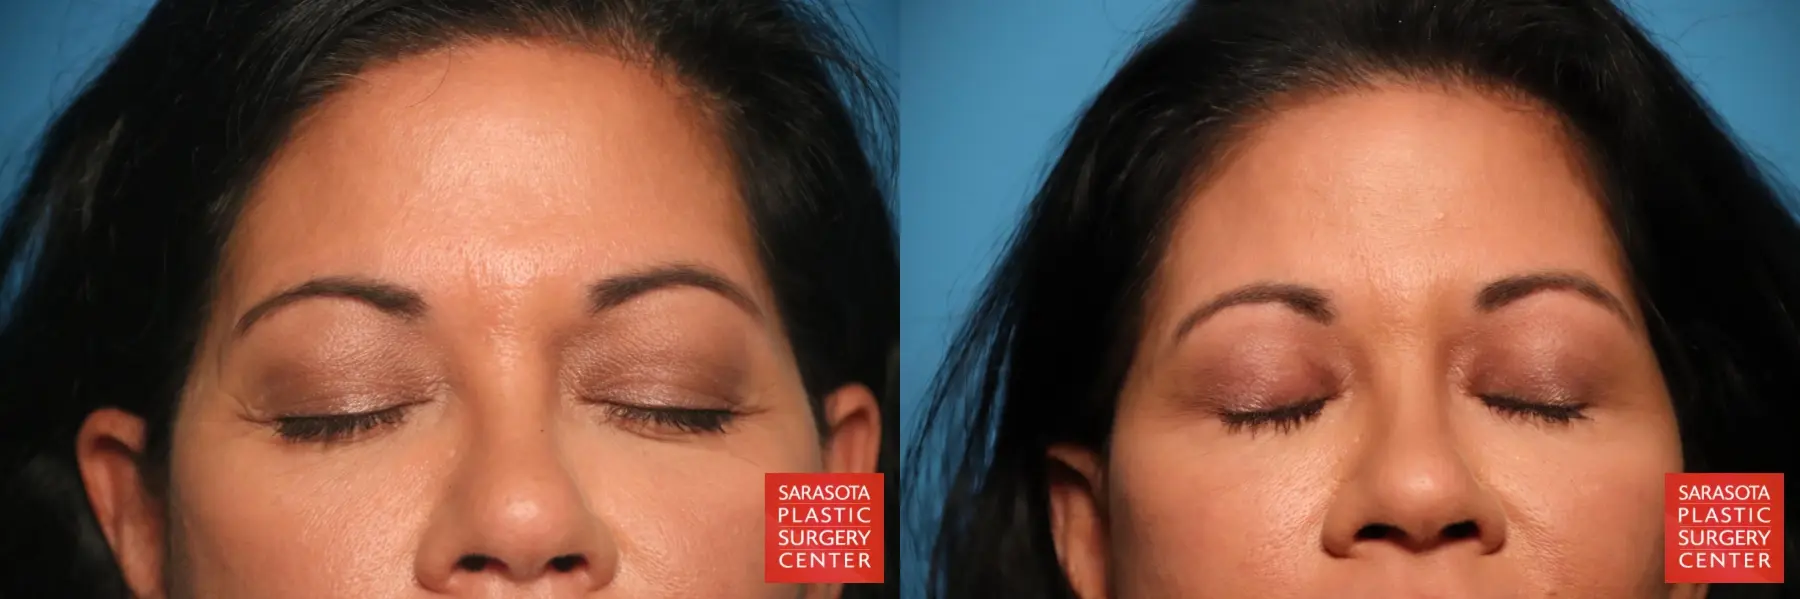 Eyelid Lift: Patient 47 - Before and After 3